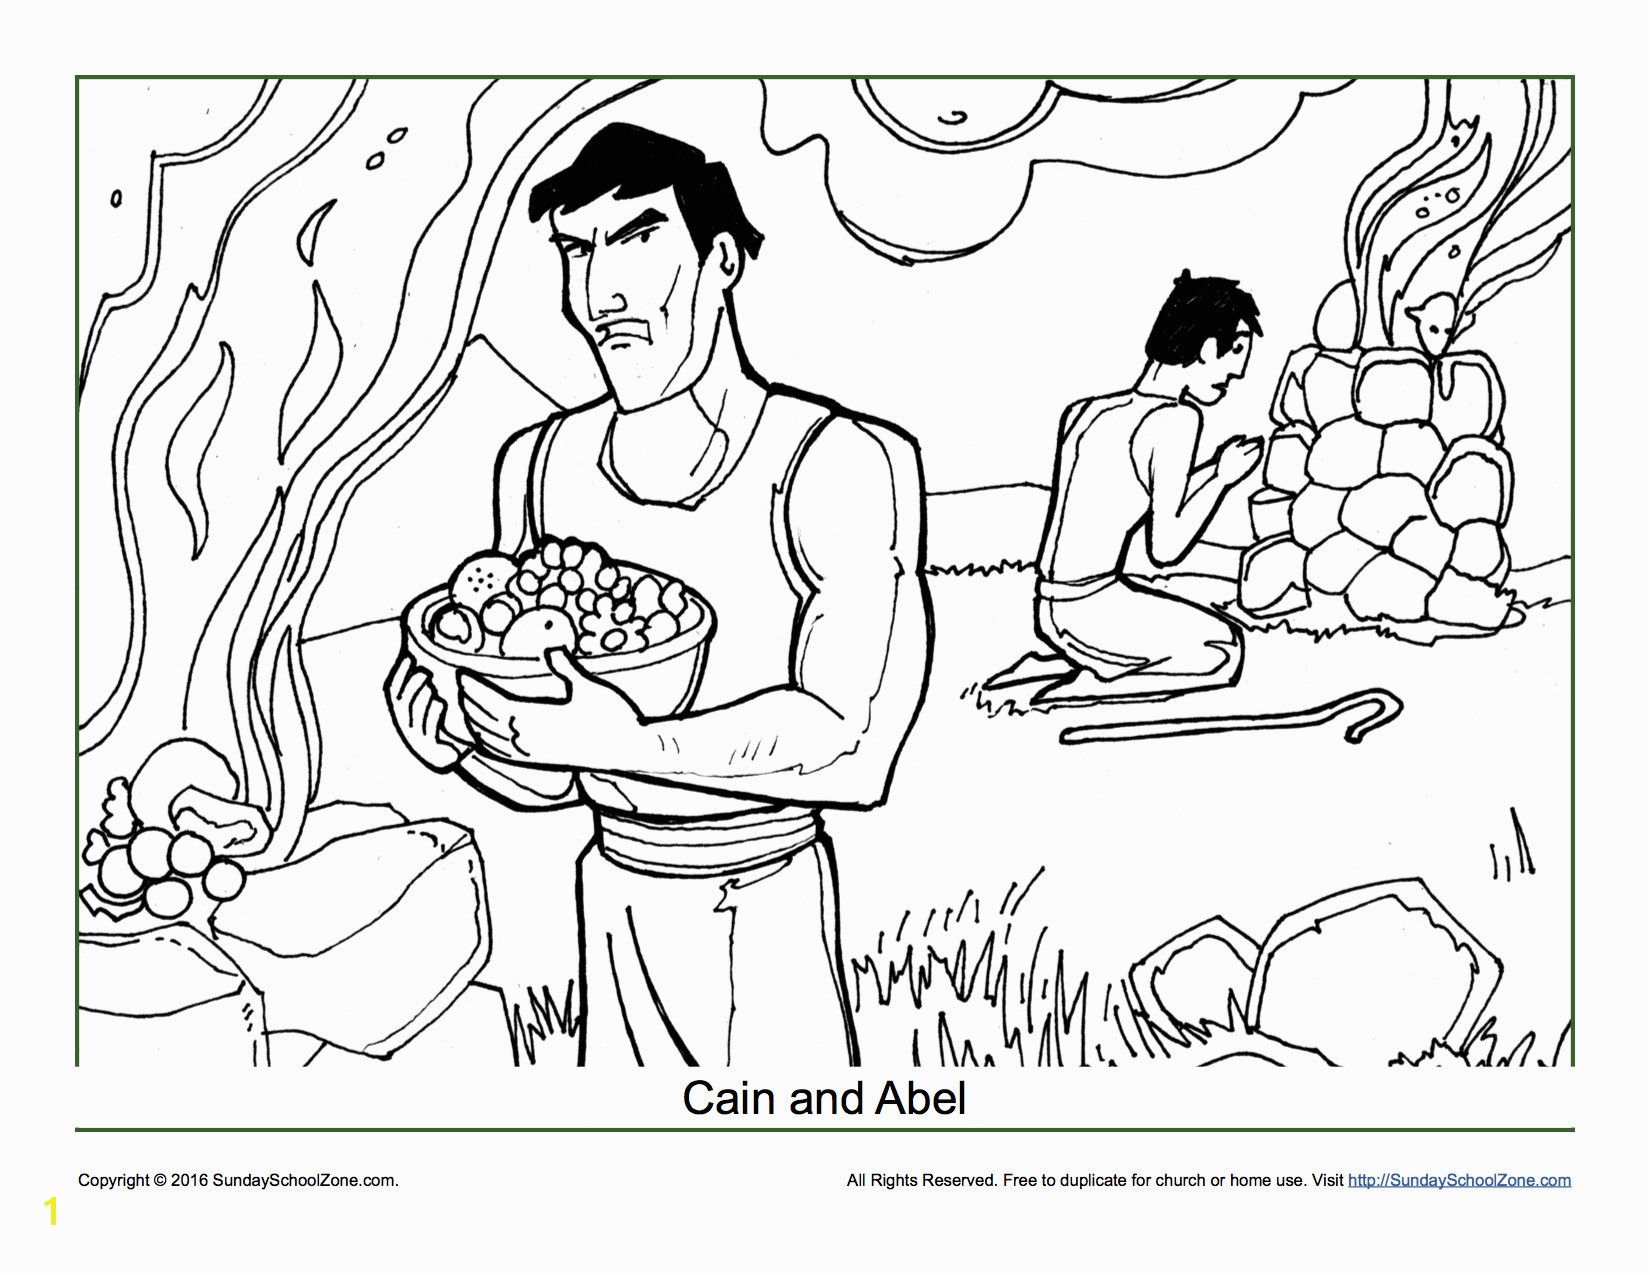 Love Thy Neighbor Coloring Pages Free Sunday School Coloring Pages for Kids Coloring Pages